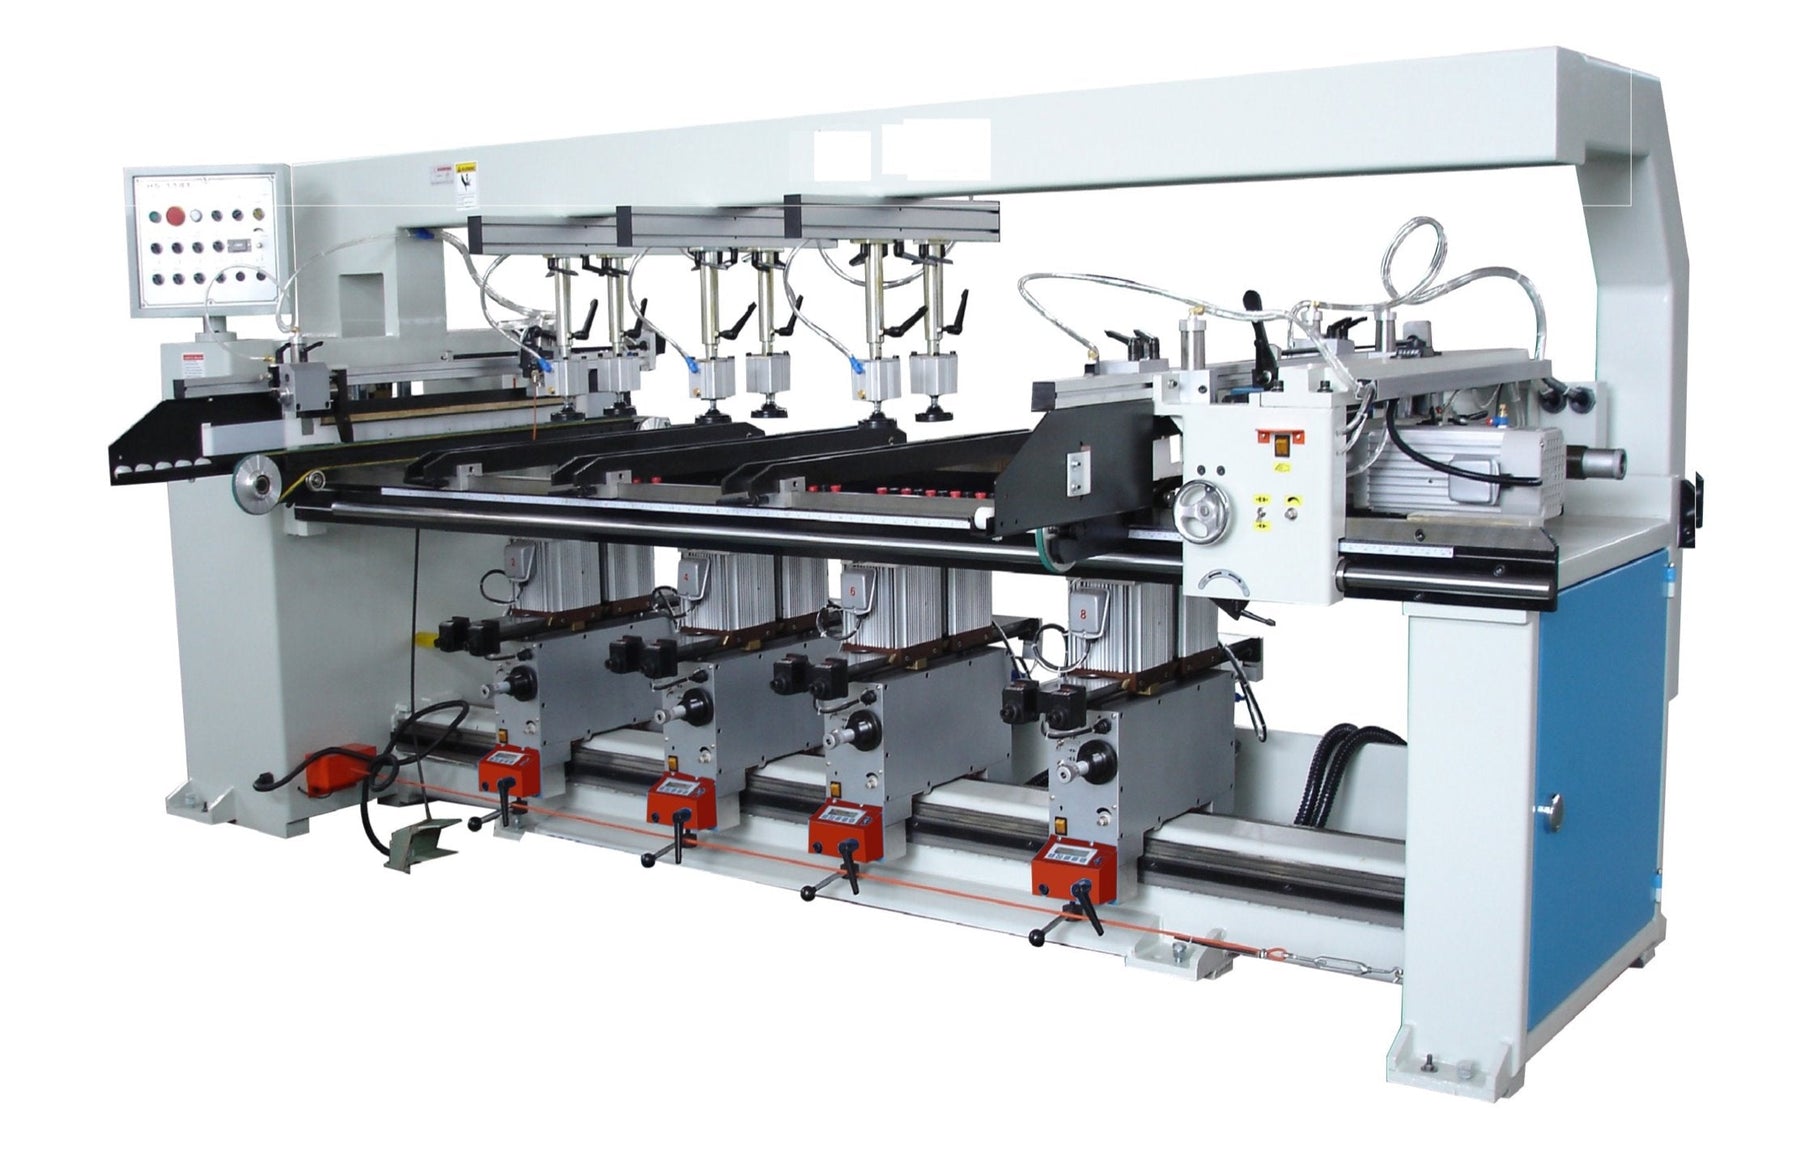 2 Horizontal, 4 Vertical Construction Line Boring with Auto Feed through System | BR-114T  | Line Boring Machine | Castaly